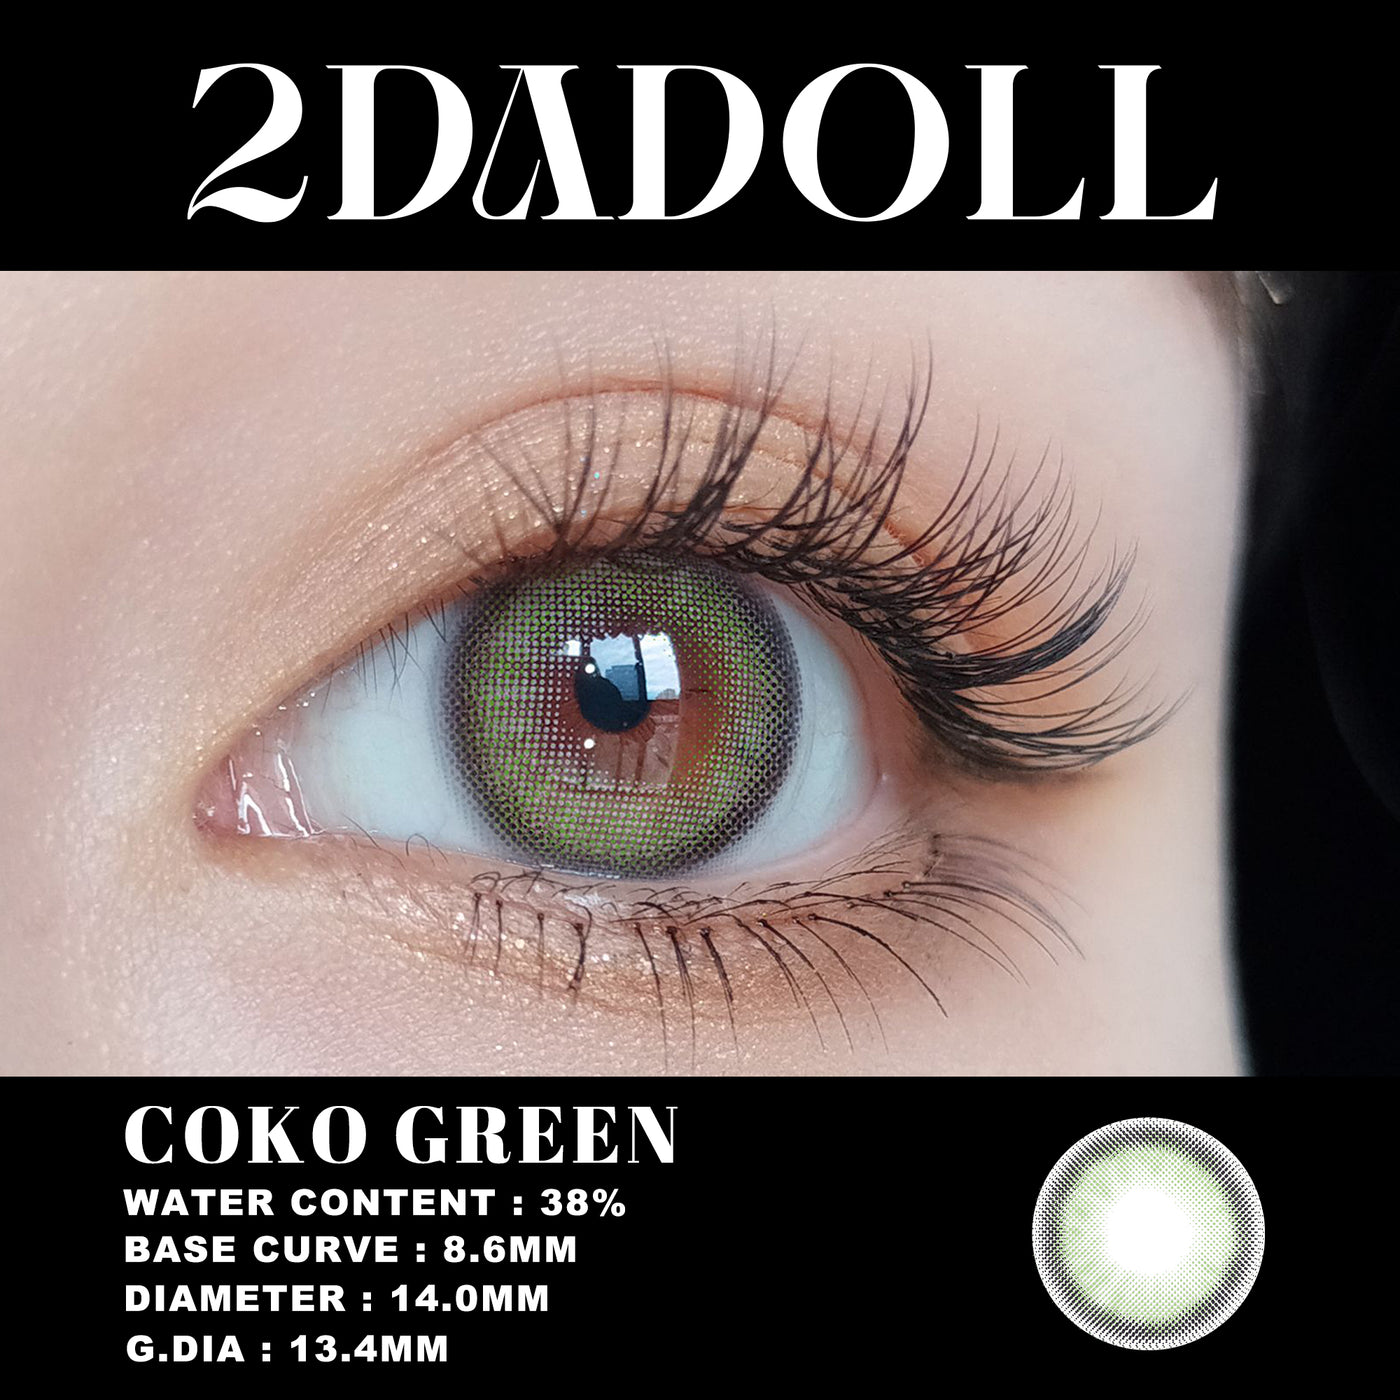 2Dadoll coko green Contact Lenses(1 pair/6 months)